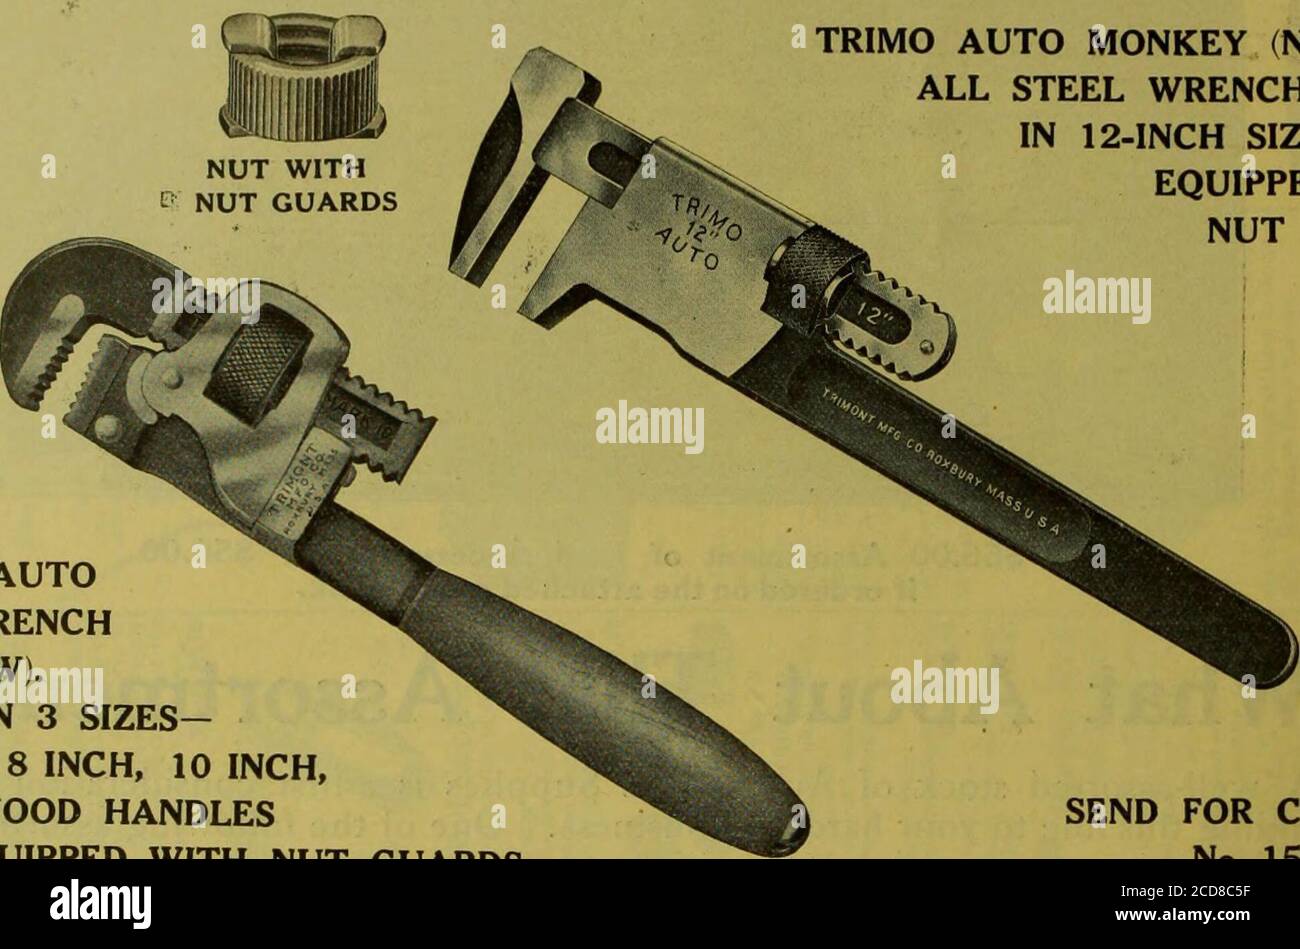 . Hardware merchandising March-June 1915 . ce 1—Rubber Tire Band 1—Blow-Out Patch 1—Box Tire Patches 1—Perfect Tire Tool 1—Aeolus Tire Pump 1—Barrett Jack 1—Presto Hand Lamp 1—pr. Albex Folding Goggles 1—Ford Rubber Mat 1—Gasoline Reserve Gauge 1—set (3) Pedal Pads 1—Handy Lamp These prices hold in Ontario and the East and are f.o.b. our nearest warehouse. The Canadian Fairbanks-Morse Co., Limited St. John, Quebec, Montreal, Ottawa, Toronto, Hamilton, Winnipeg, Saskatoon, Calgary, Edmonton, Vancouver, Victoria The Canadian Fairbanks-Morse Co., Limited Kindly enter my order for one of the above Stock Photo